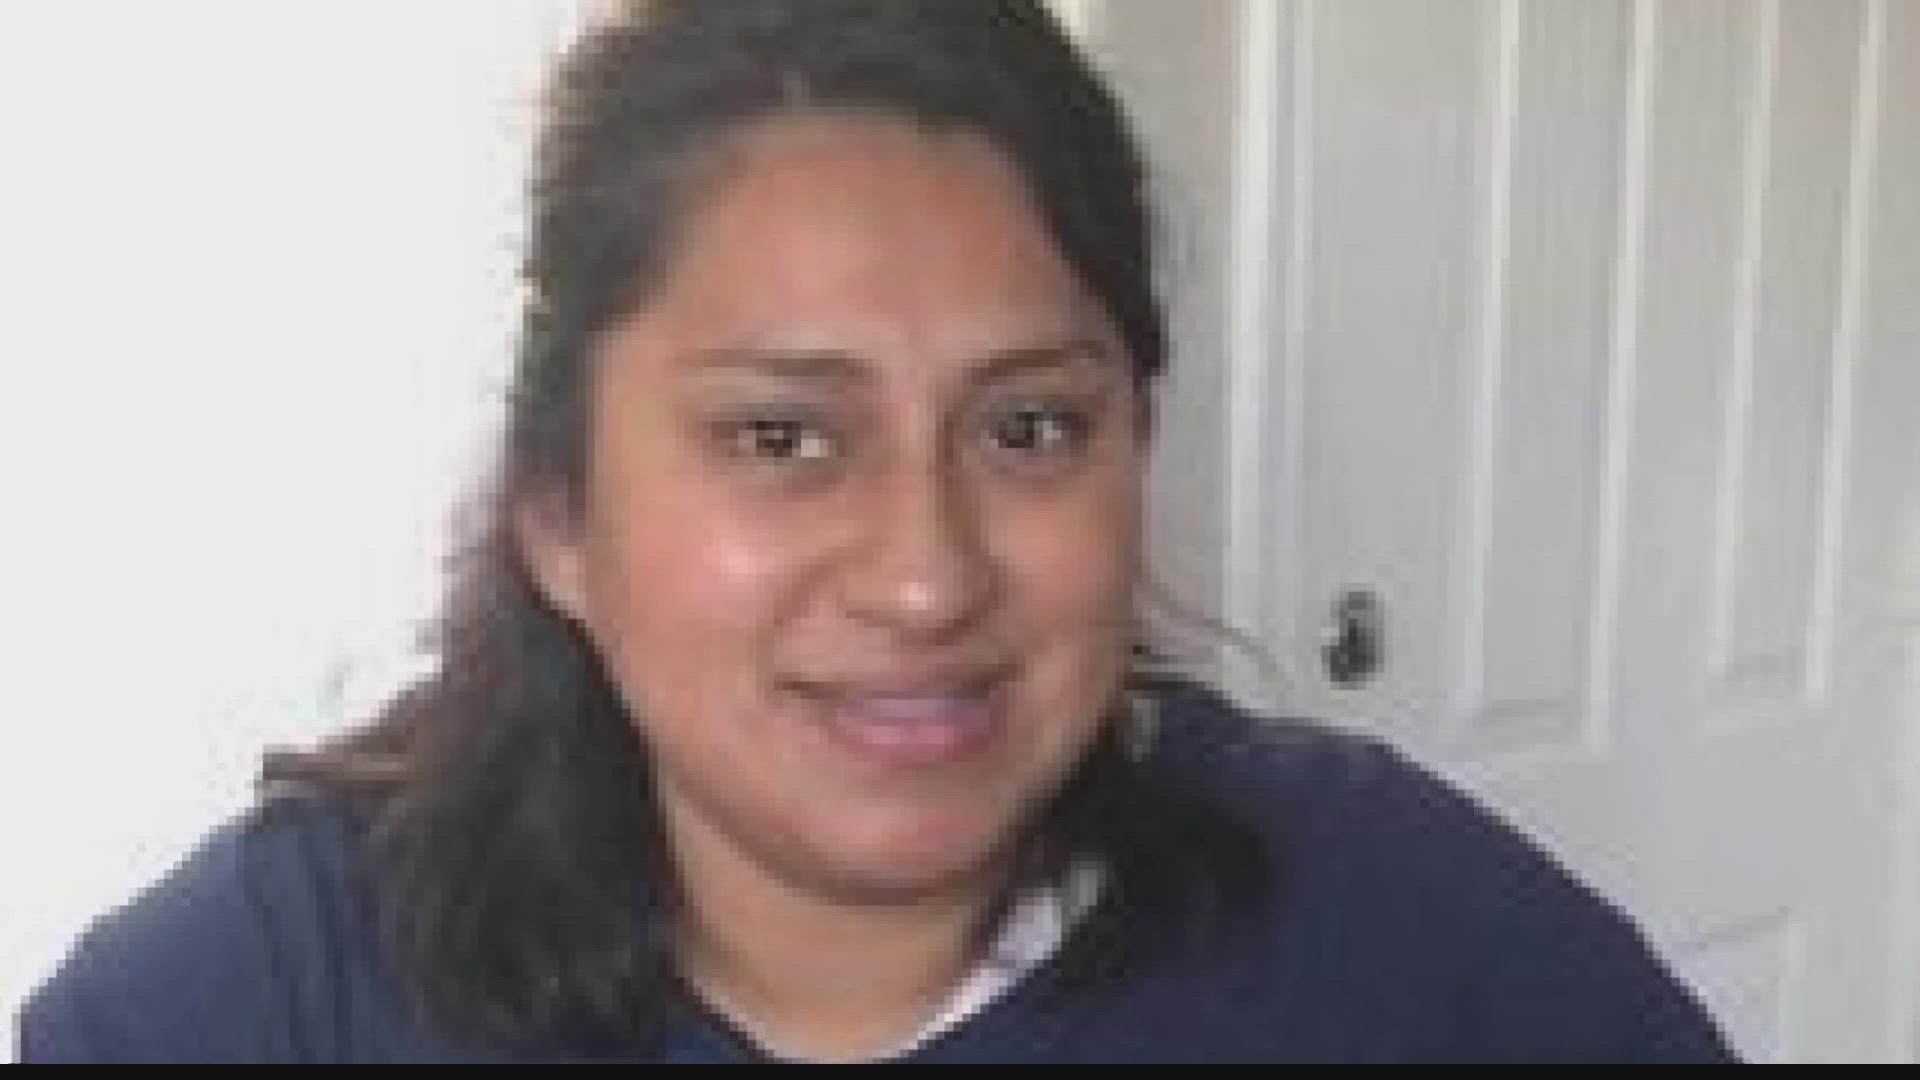 Claudia Moreno, a Tempe mother of three, is missing. Her family says she has simply vanished. No one has seen or heard from her since November 10.